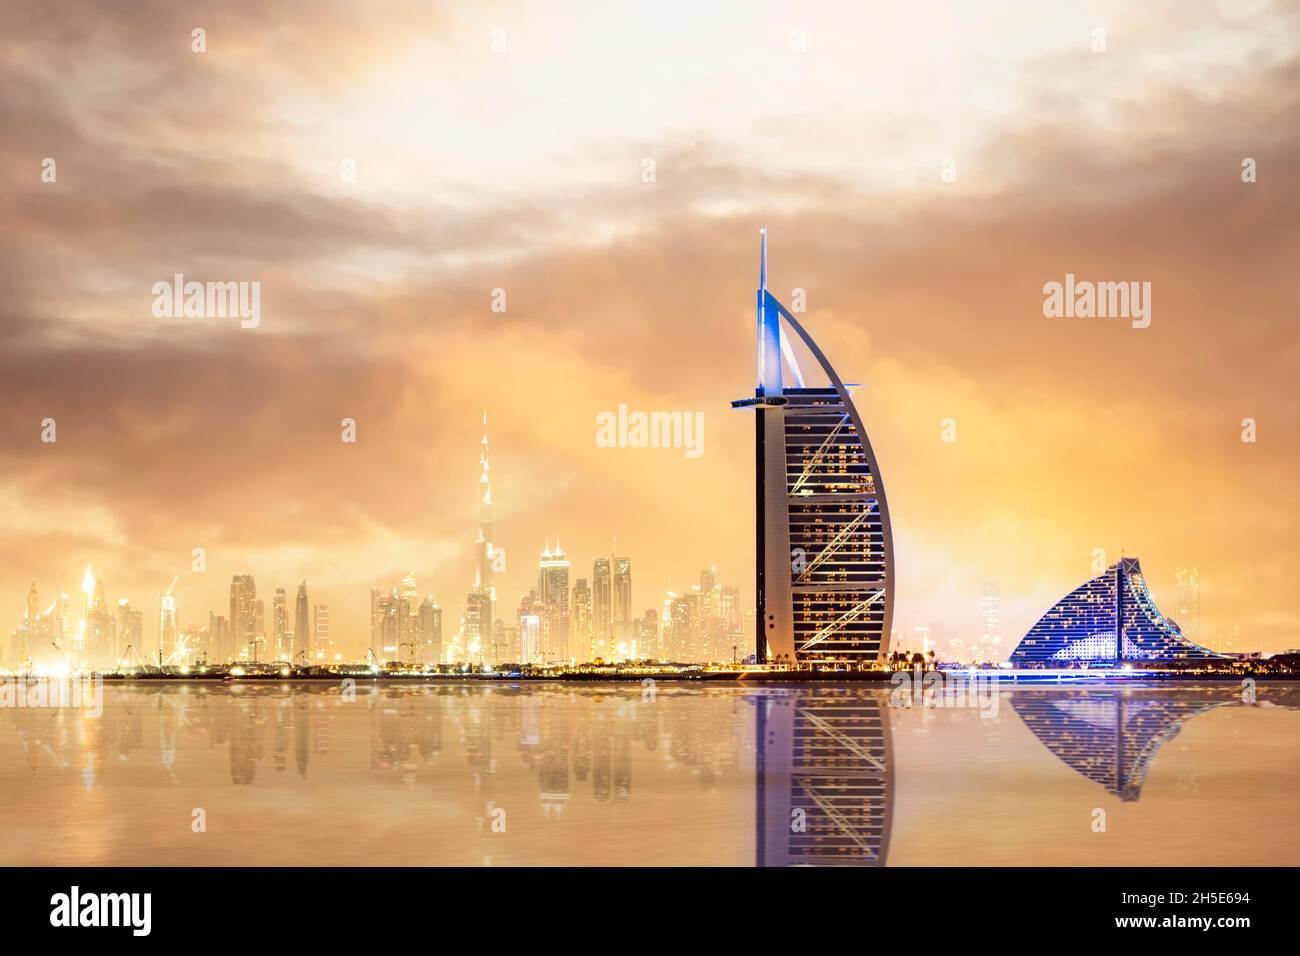 Dramatic sunset over the Dubai skyline with the Burj Khalifa in the distance and the Burj al-Arab luxury hotel in the foreground. Stock Photo